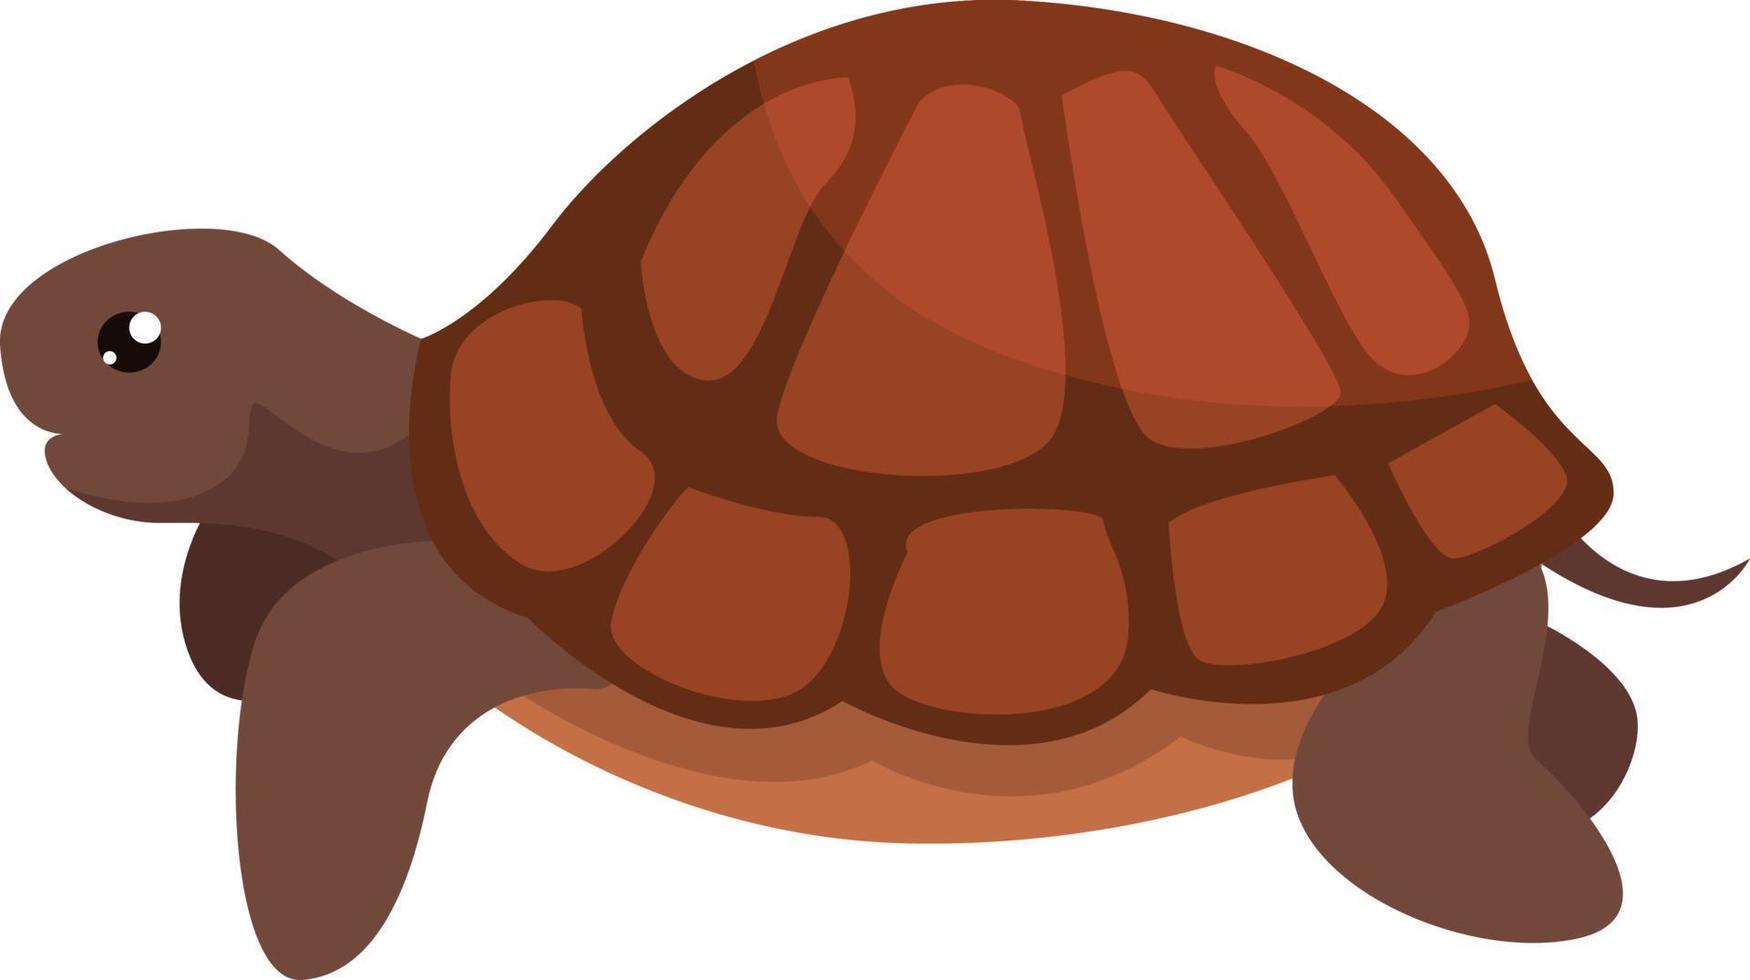 Brown turtle, illustration, vector on white background.